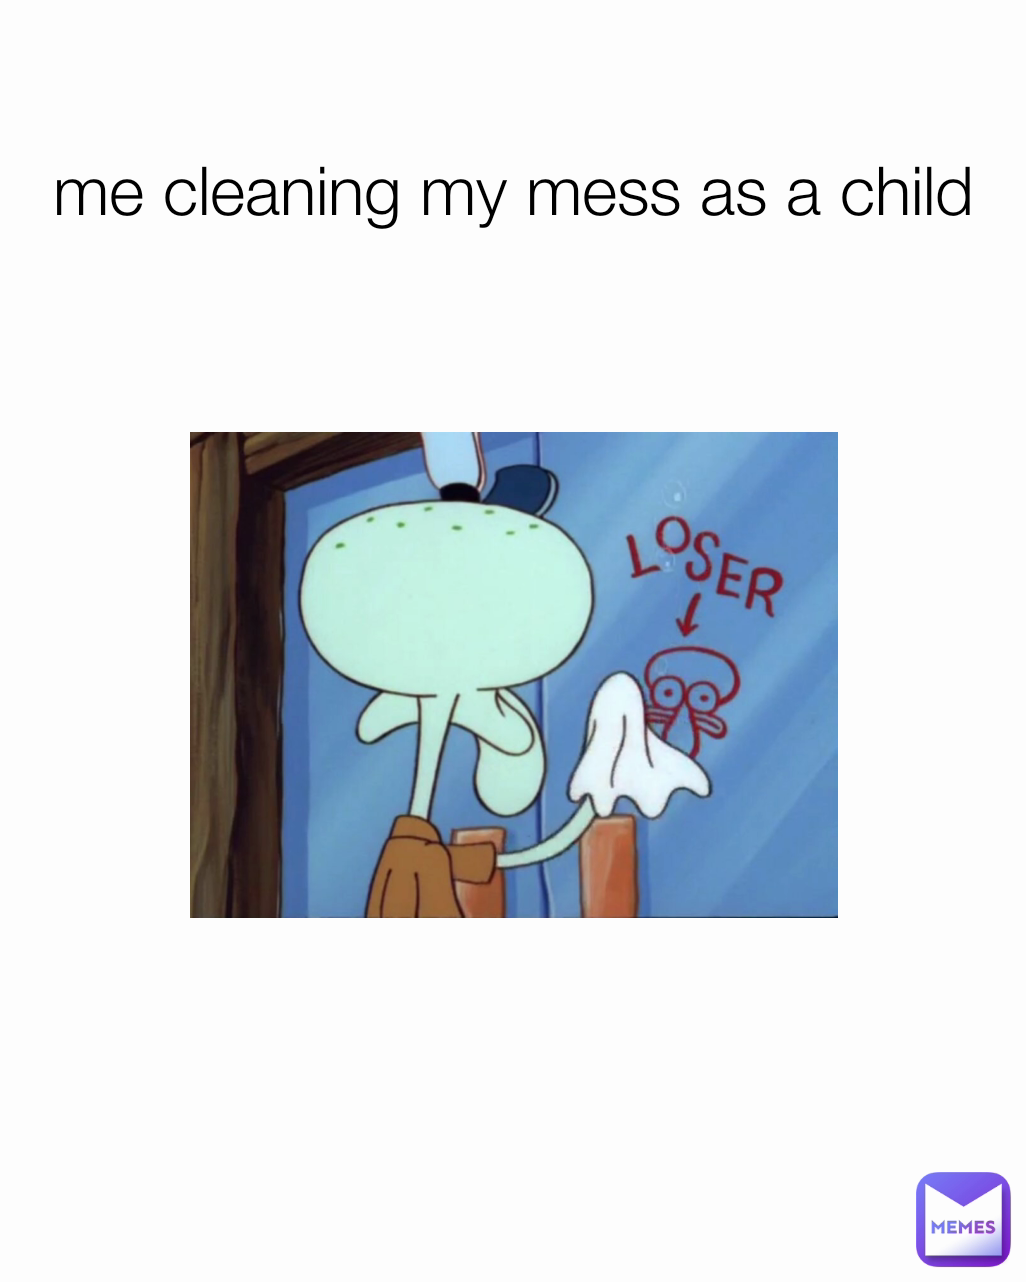 me cleaning my mess as a child